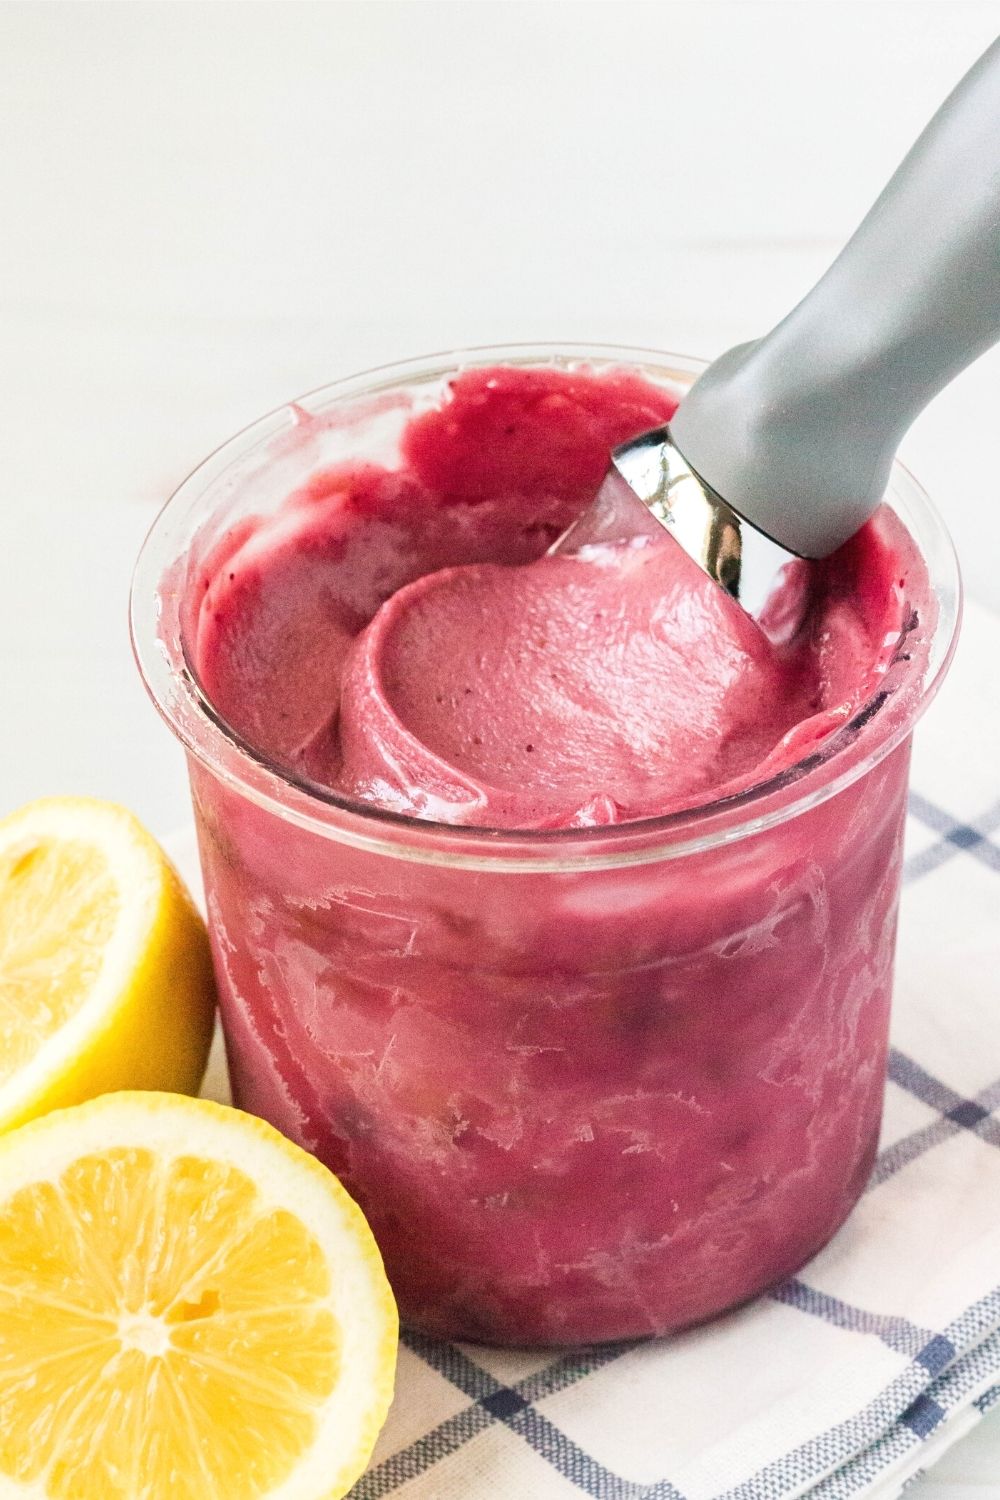 a Ninja Creami pint filled with berry lemon sorbet. An ice cream scoop is in the pint, and pieces of fresh lemons are next to the pint